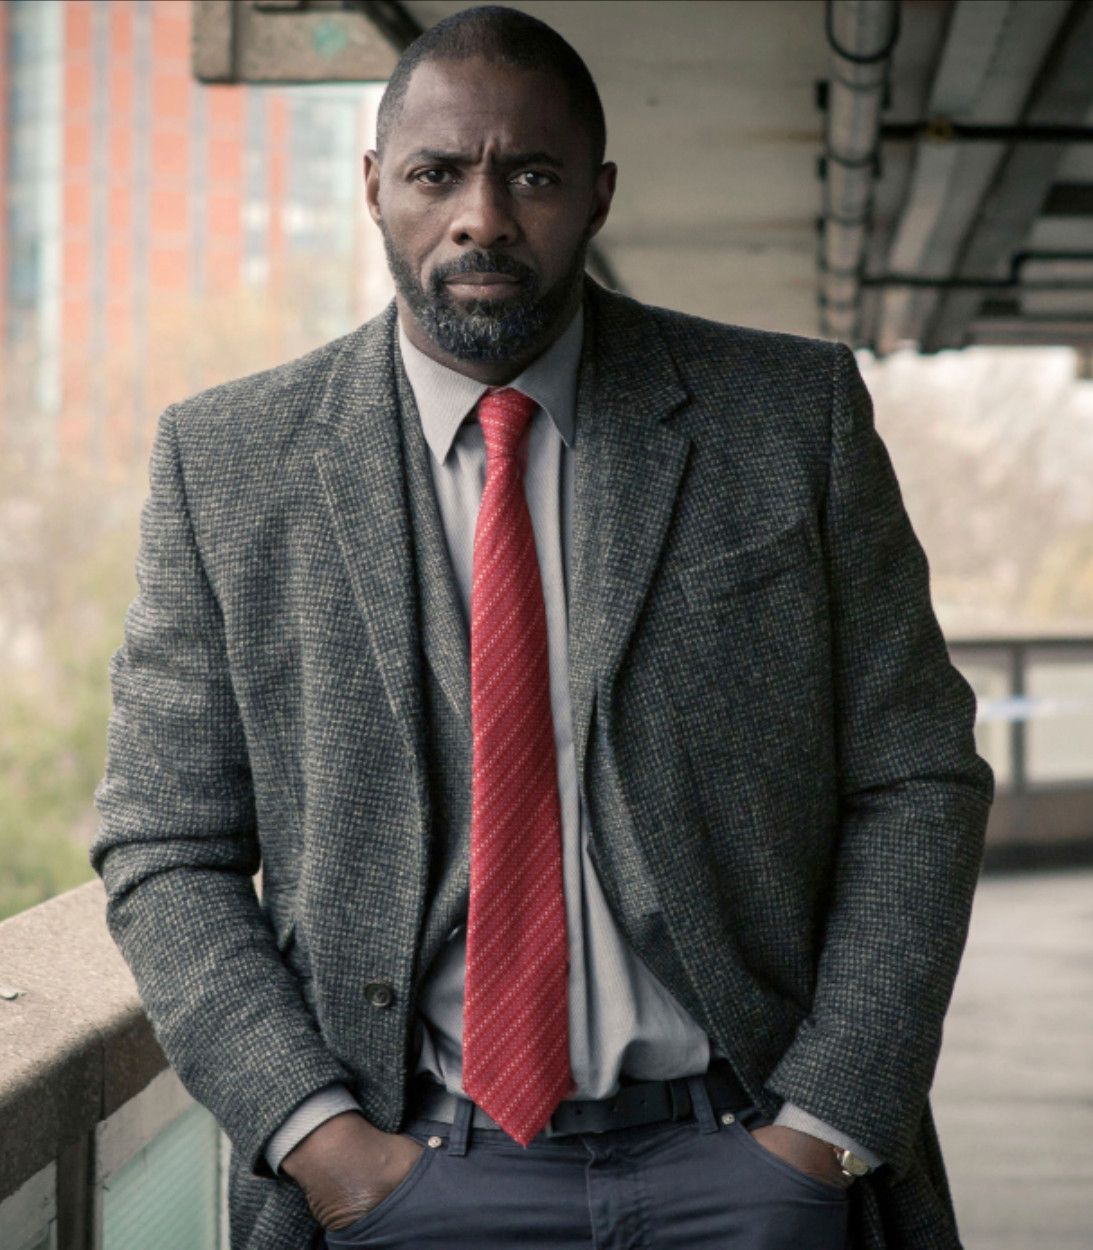 Idris Elba as Luther Vertical